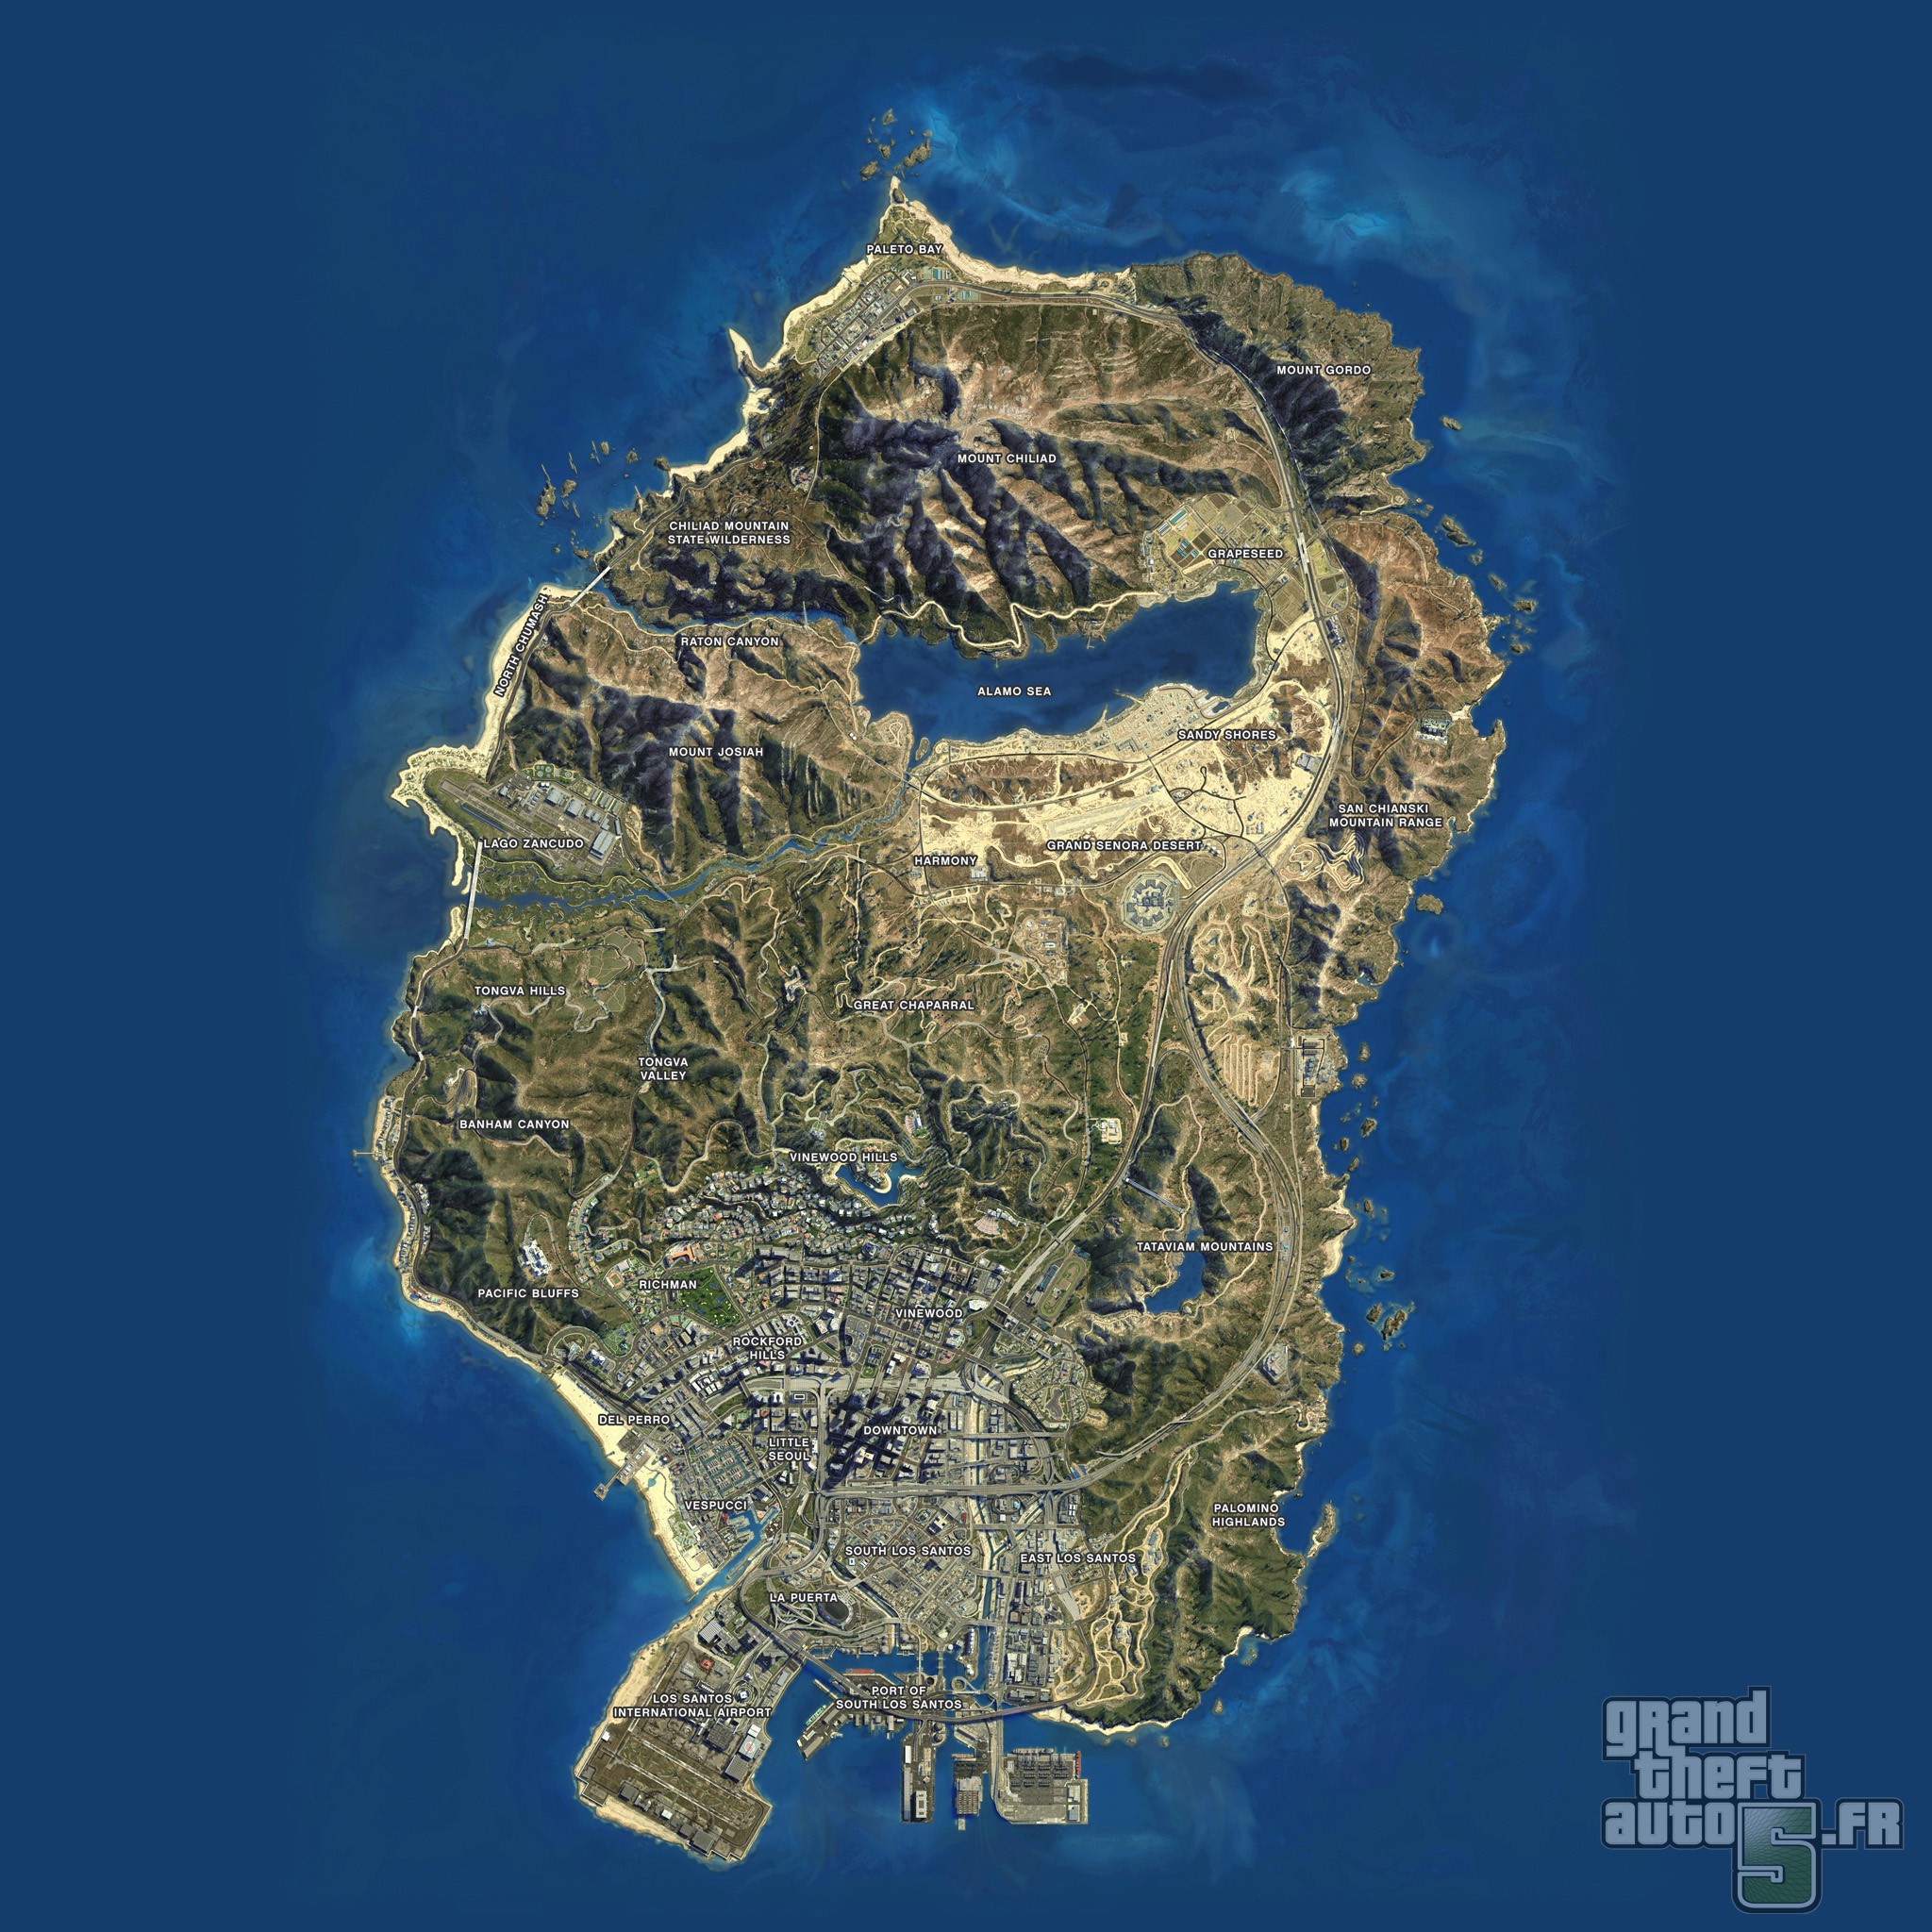 ovni gta 5 emplacement